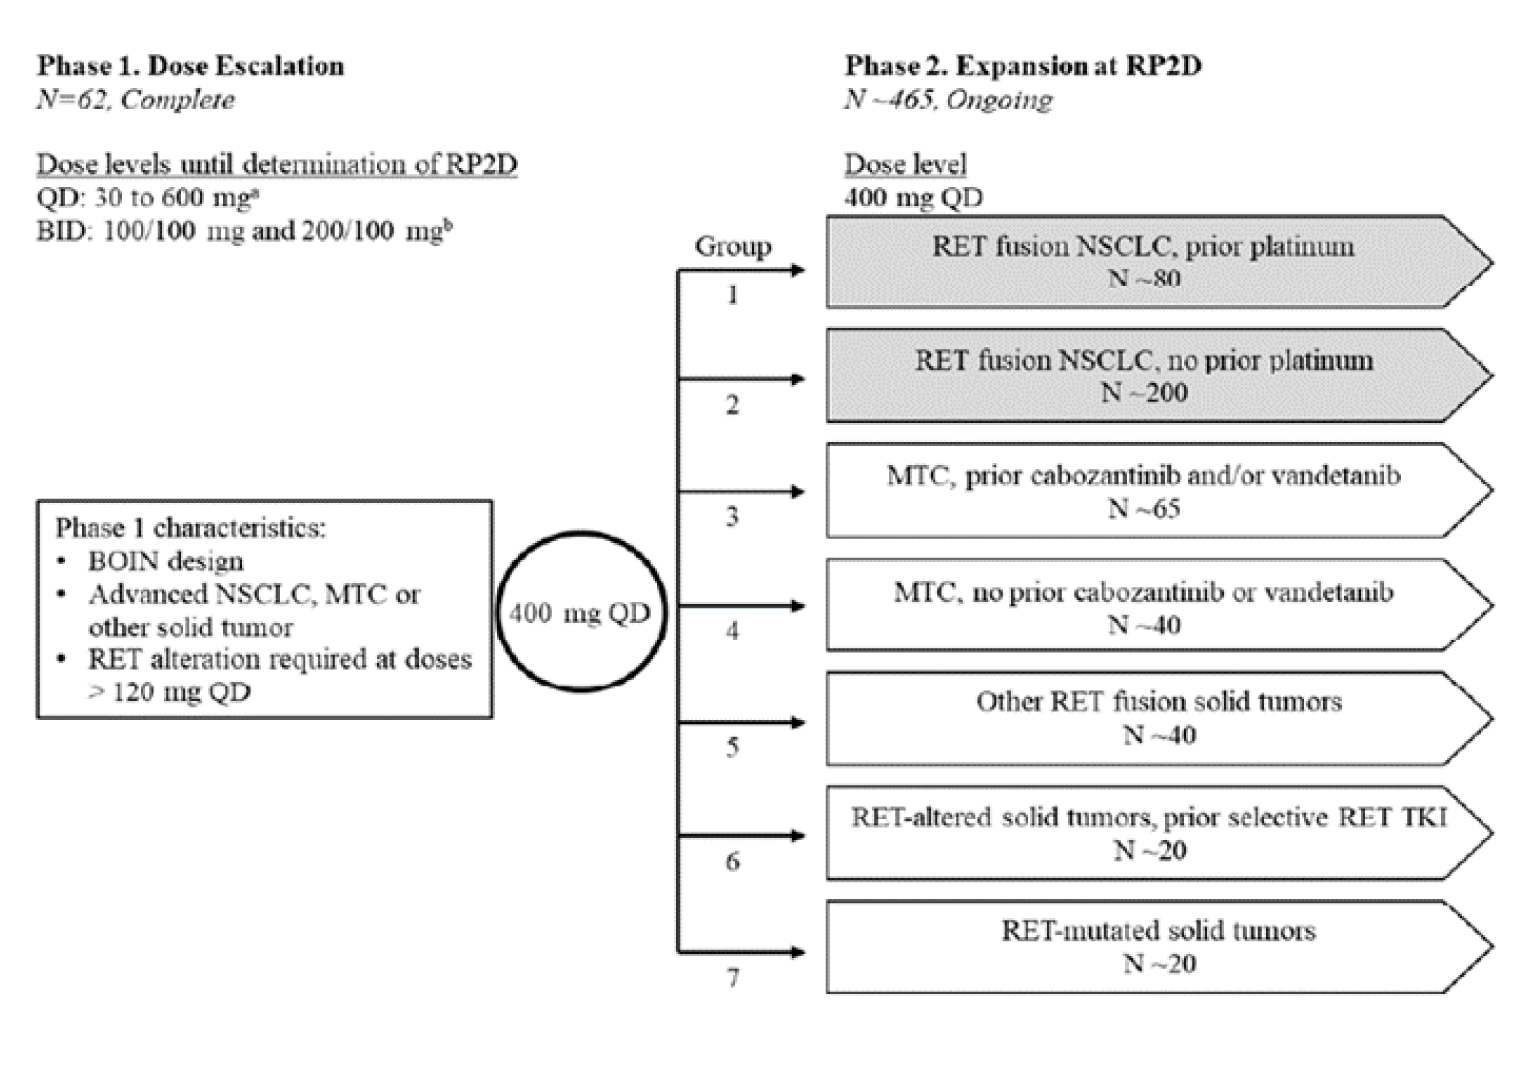 The figure shows the ARROW study schematic. Phase 1 (N = 65) consisted of a dose escalation phase where doses were escalated until the determination of the recommended phase 2 dose. QD was planned to be escalated from 30 to 600 mg and BID was escalated from 100/100 mg to 200/100 mg. Phase 2 (N = approximately 465, ongoing) was an expansion at using 400 mg QD, patients were split in 7 groups with the first group being RET fusion NSCLC, prior platinum (N = approximately 80) and the second group being RET fusion NSCLC, no prior platinum (N = approximately 200).